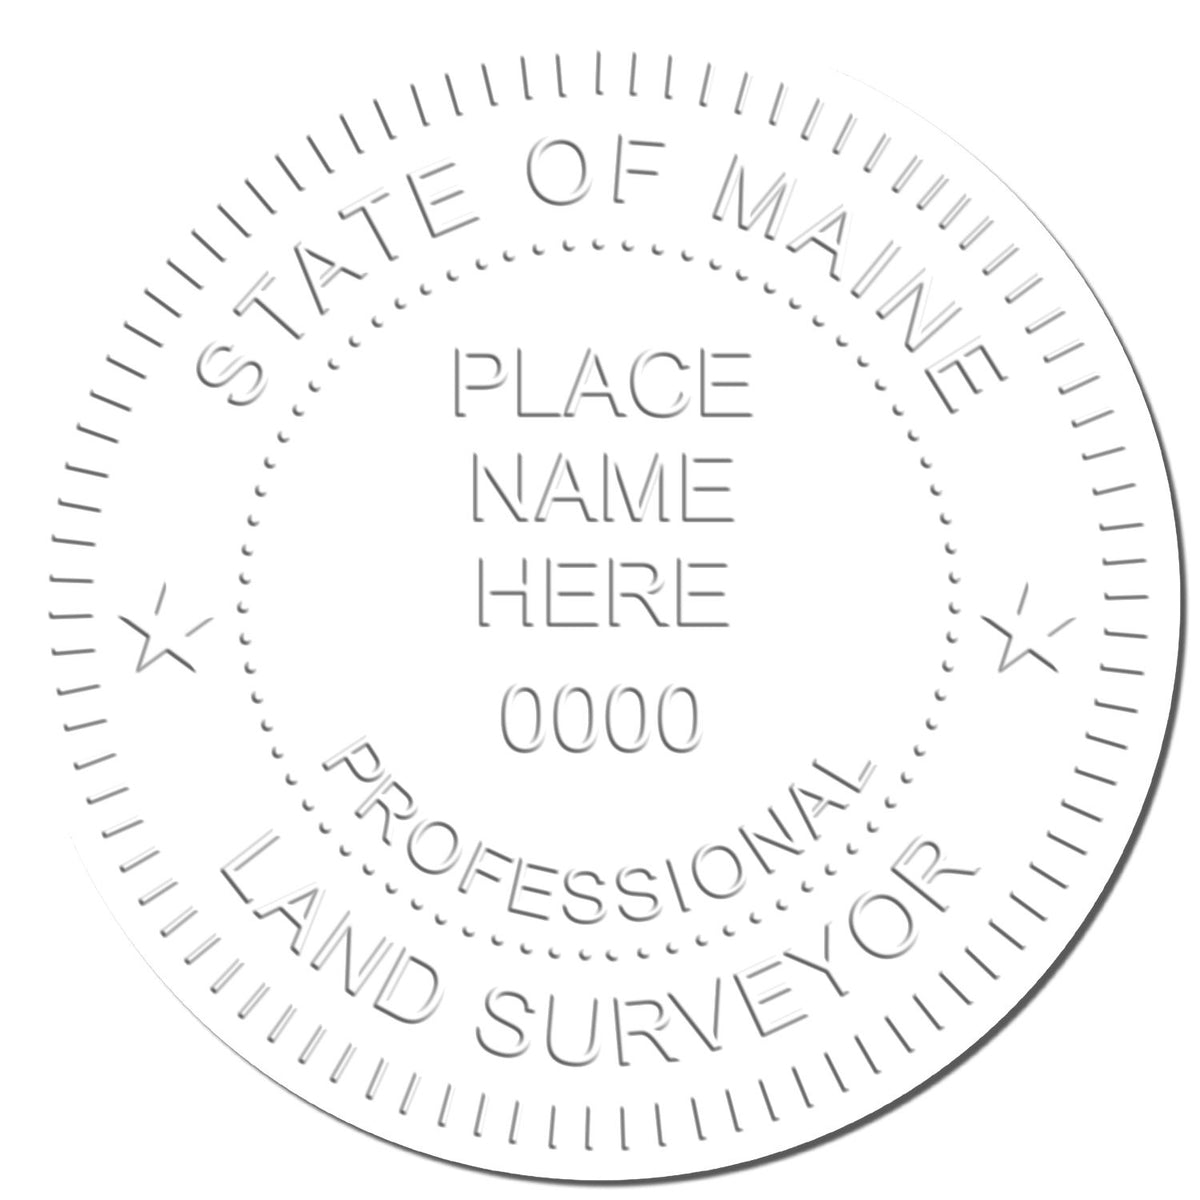 This paper is stamped with a sample imprint of the Hybrid Maine Land Surveyor Seal, signifying its quality and reliability.